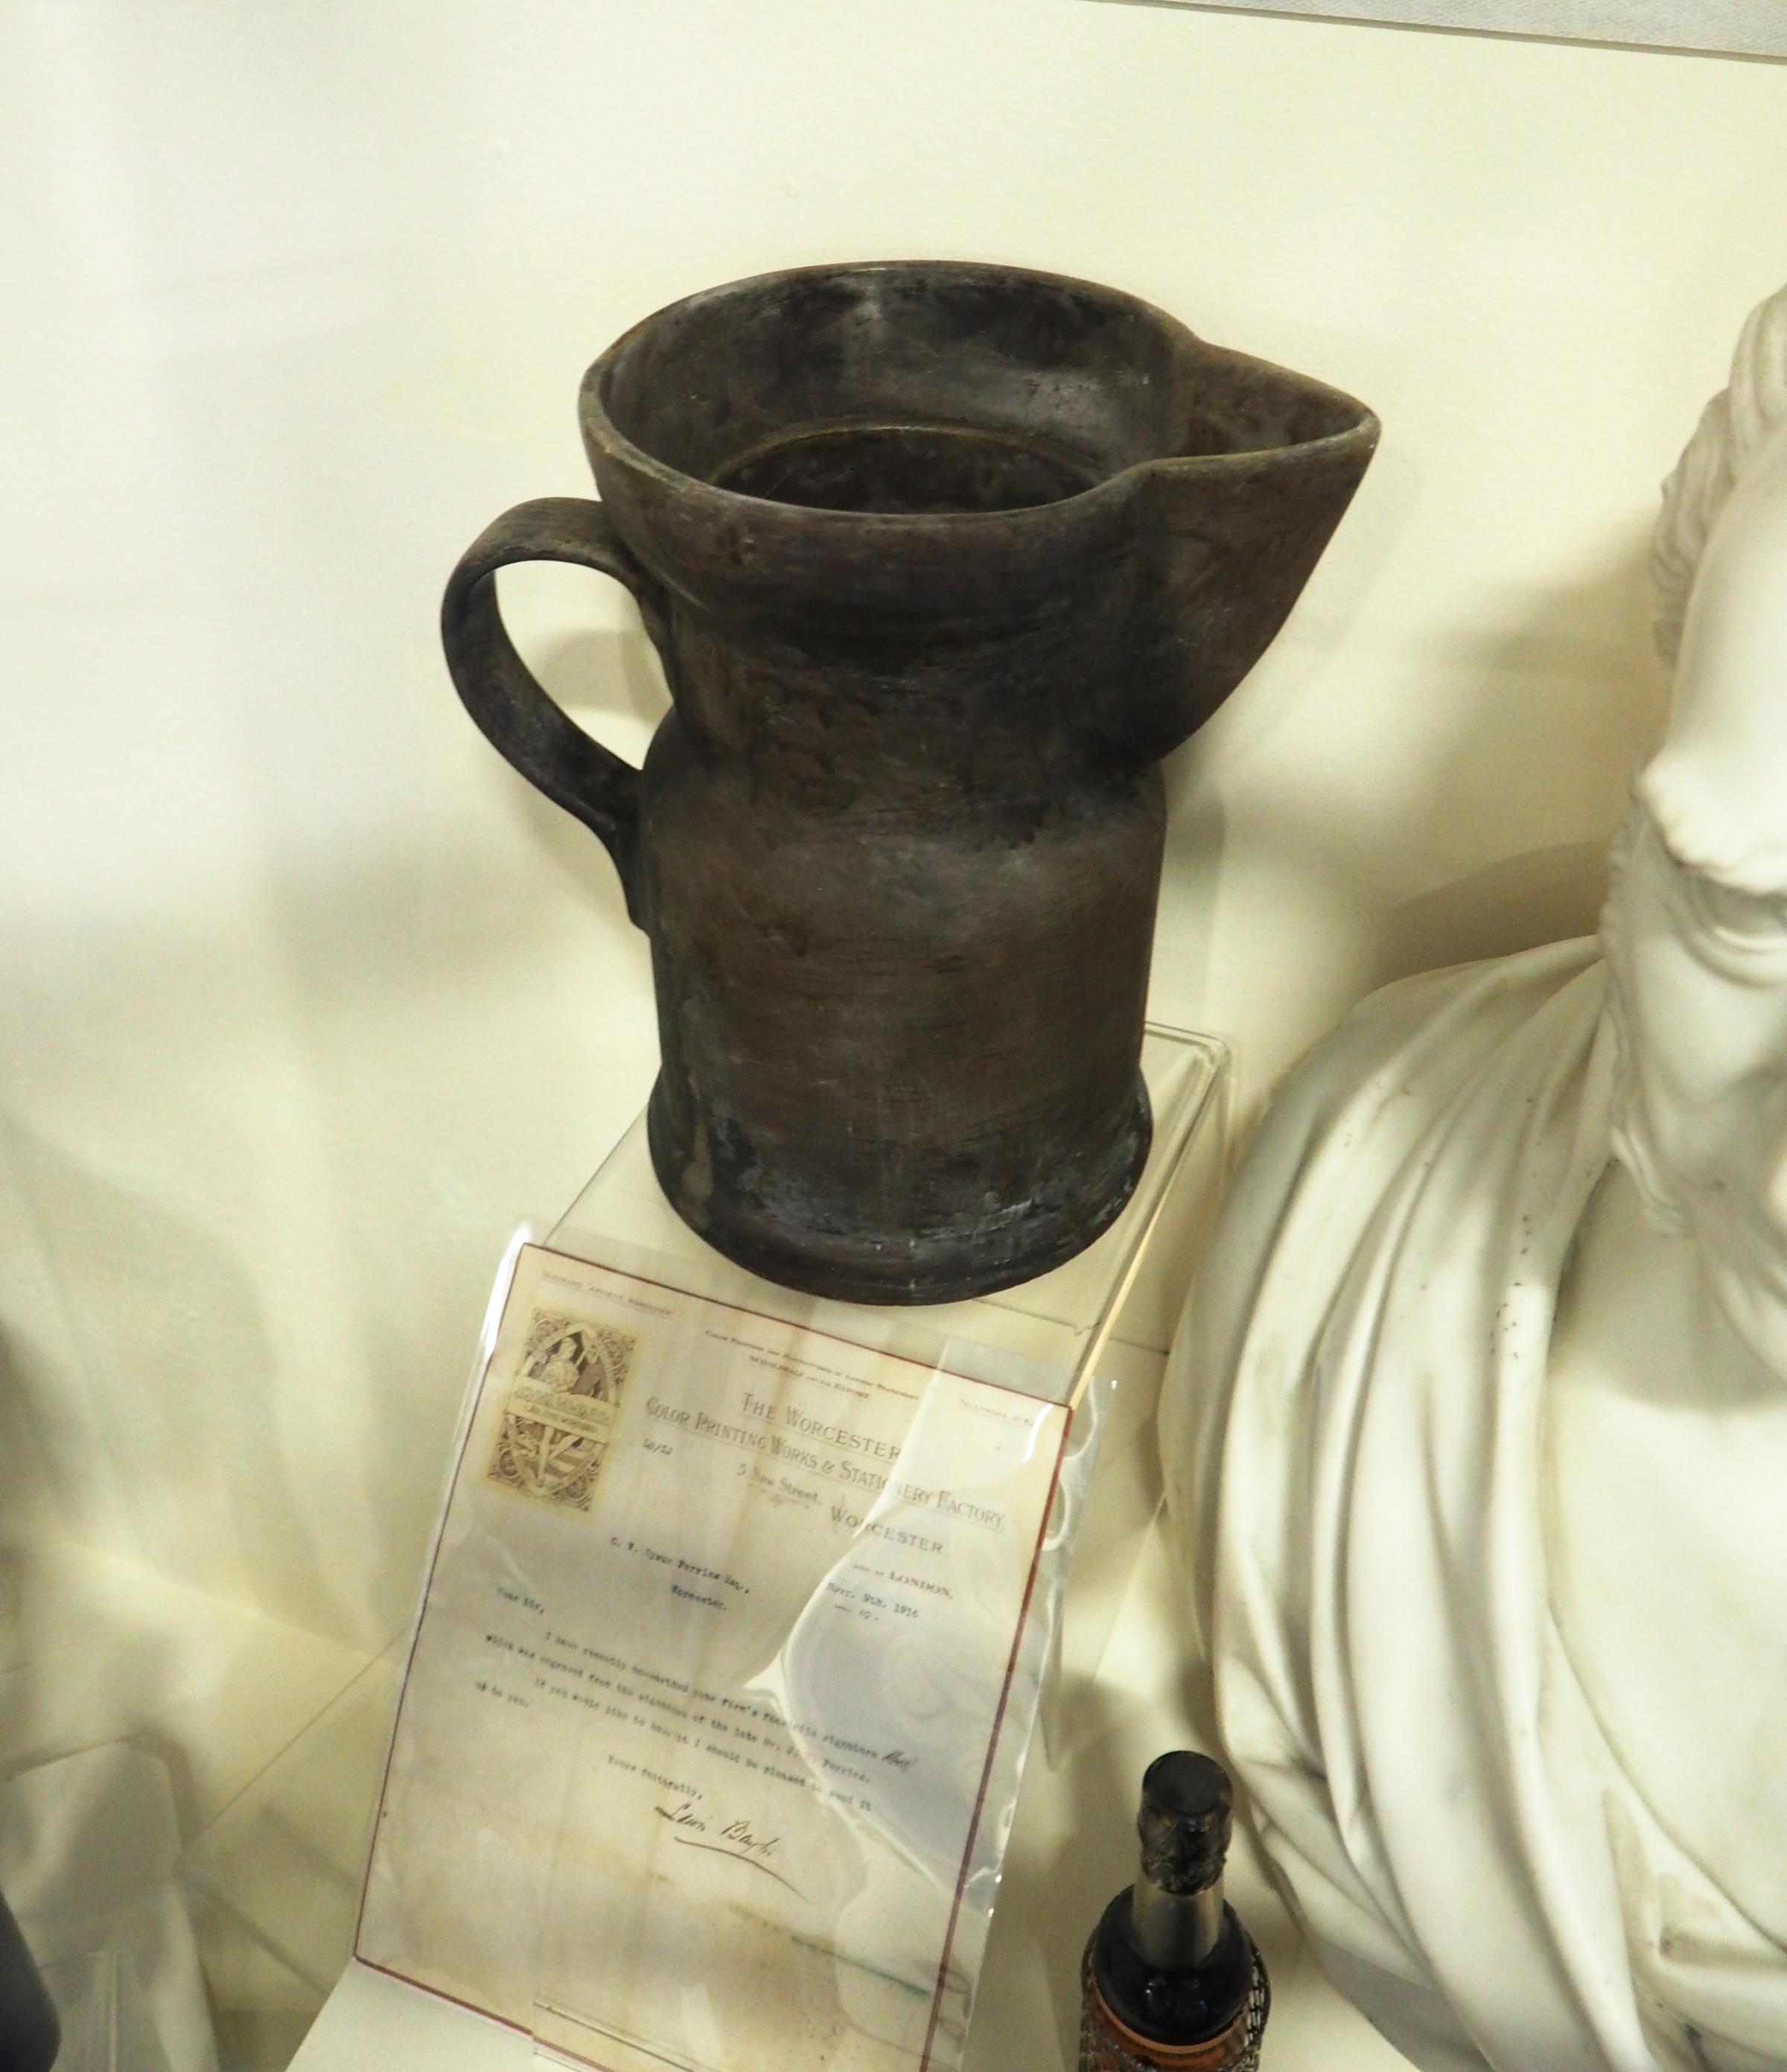 This lignite jug was used to make early batches of the sauce